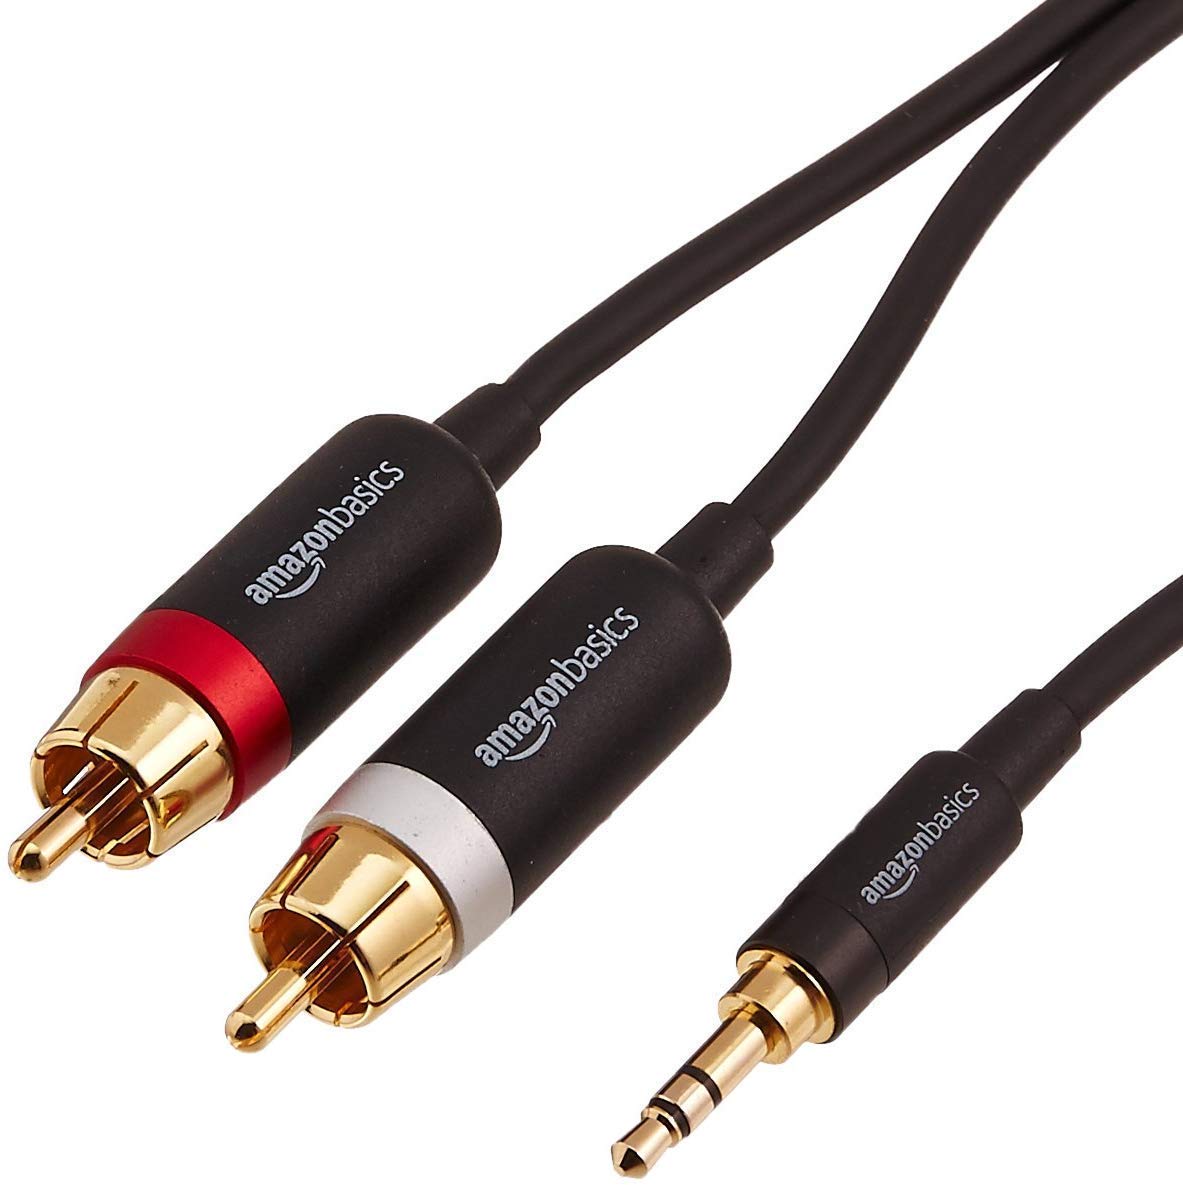 Amazon Basics 3.5mm Aux to 2 RCA Adapter Audio Cable for Stereo Speaker or Subwoofer with Gold-Plated Plugs, 4 Foot, Black